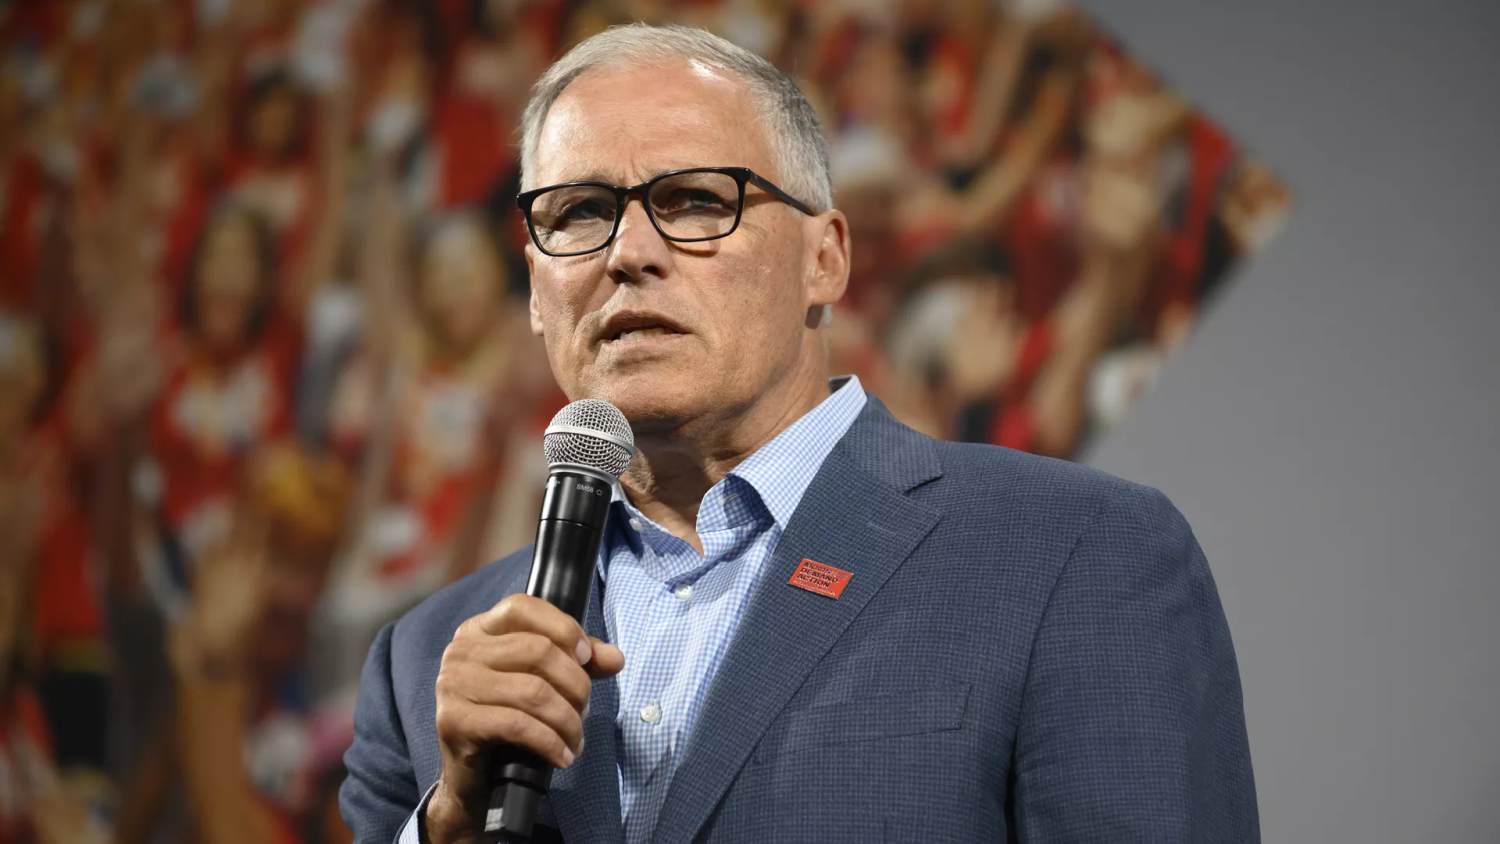 Jay Inslee 2020 Dropped Out